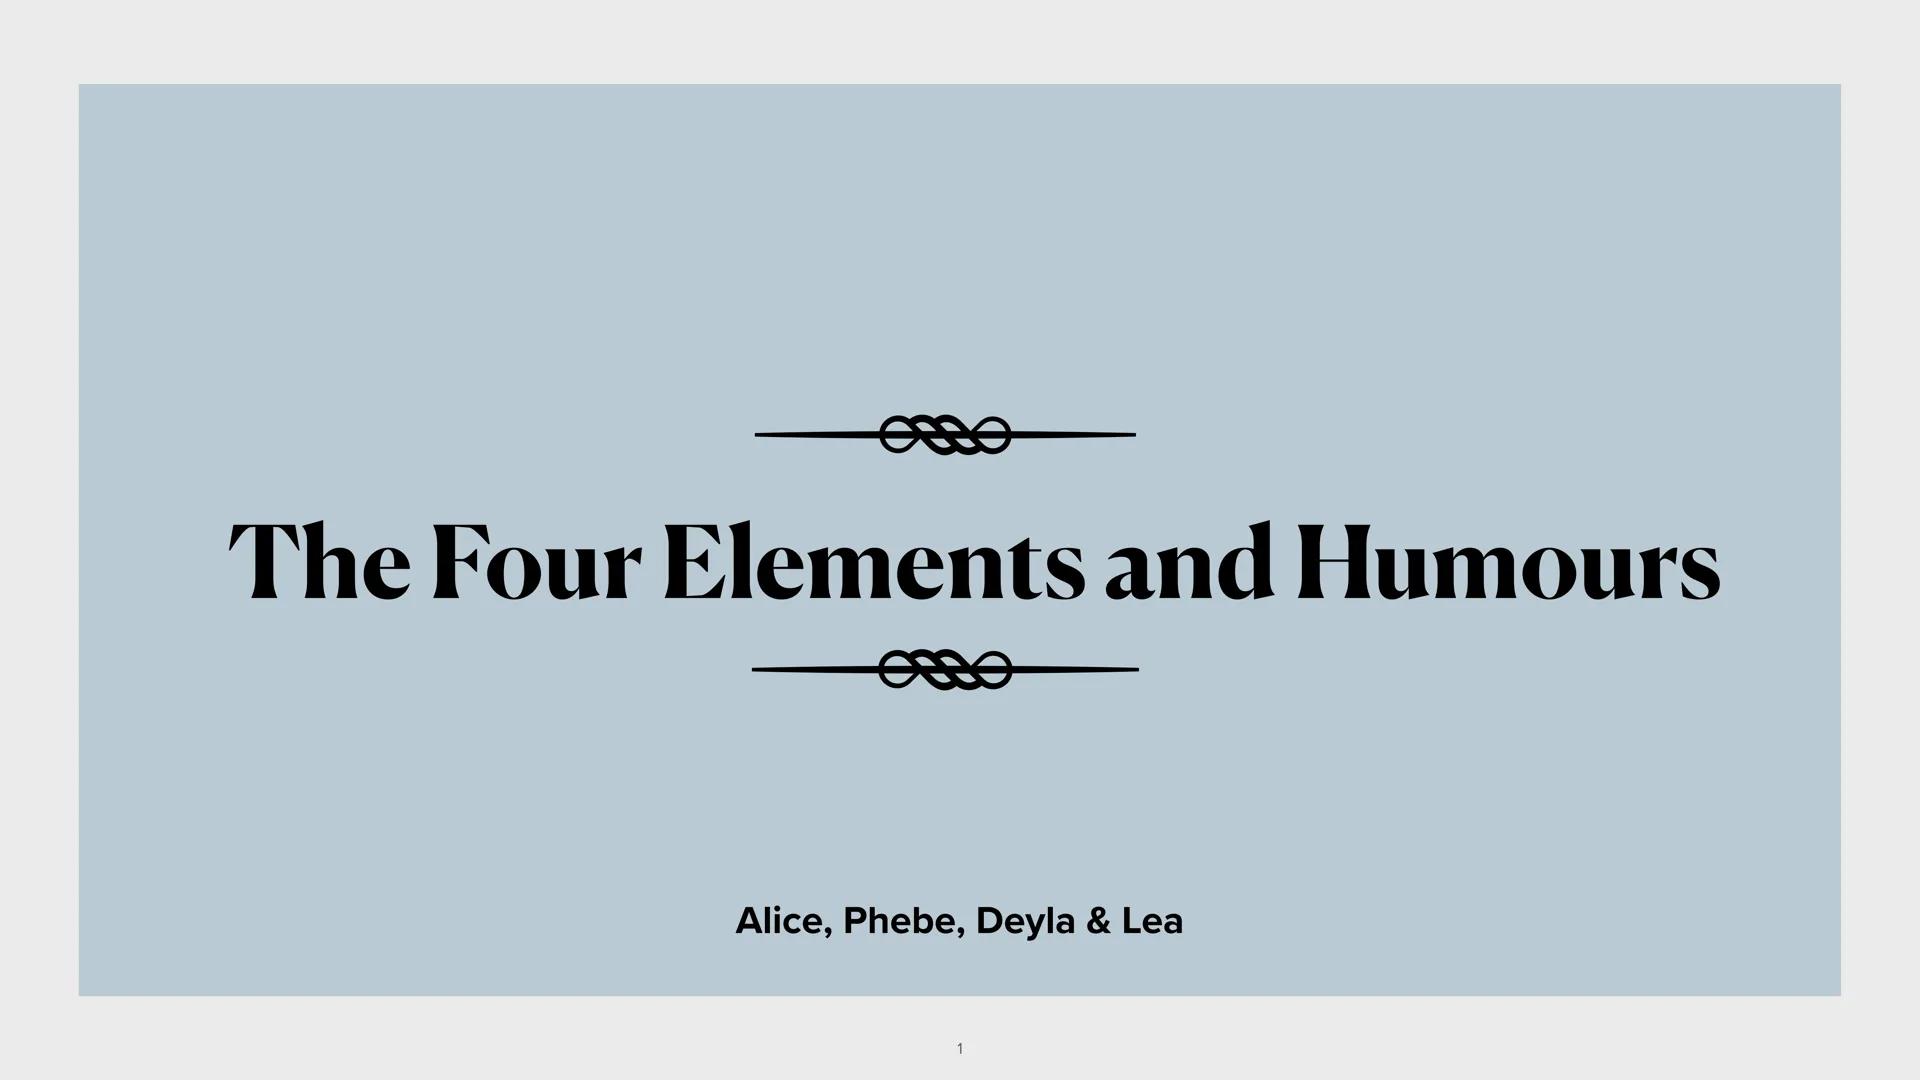 es
The Four Elements and Humours
Alice, Phebe, Deyla & Lea Structure
O Short introduction
o The Four Elements and Humours with their signifi